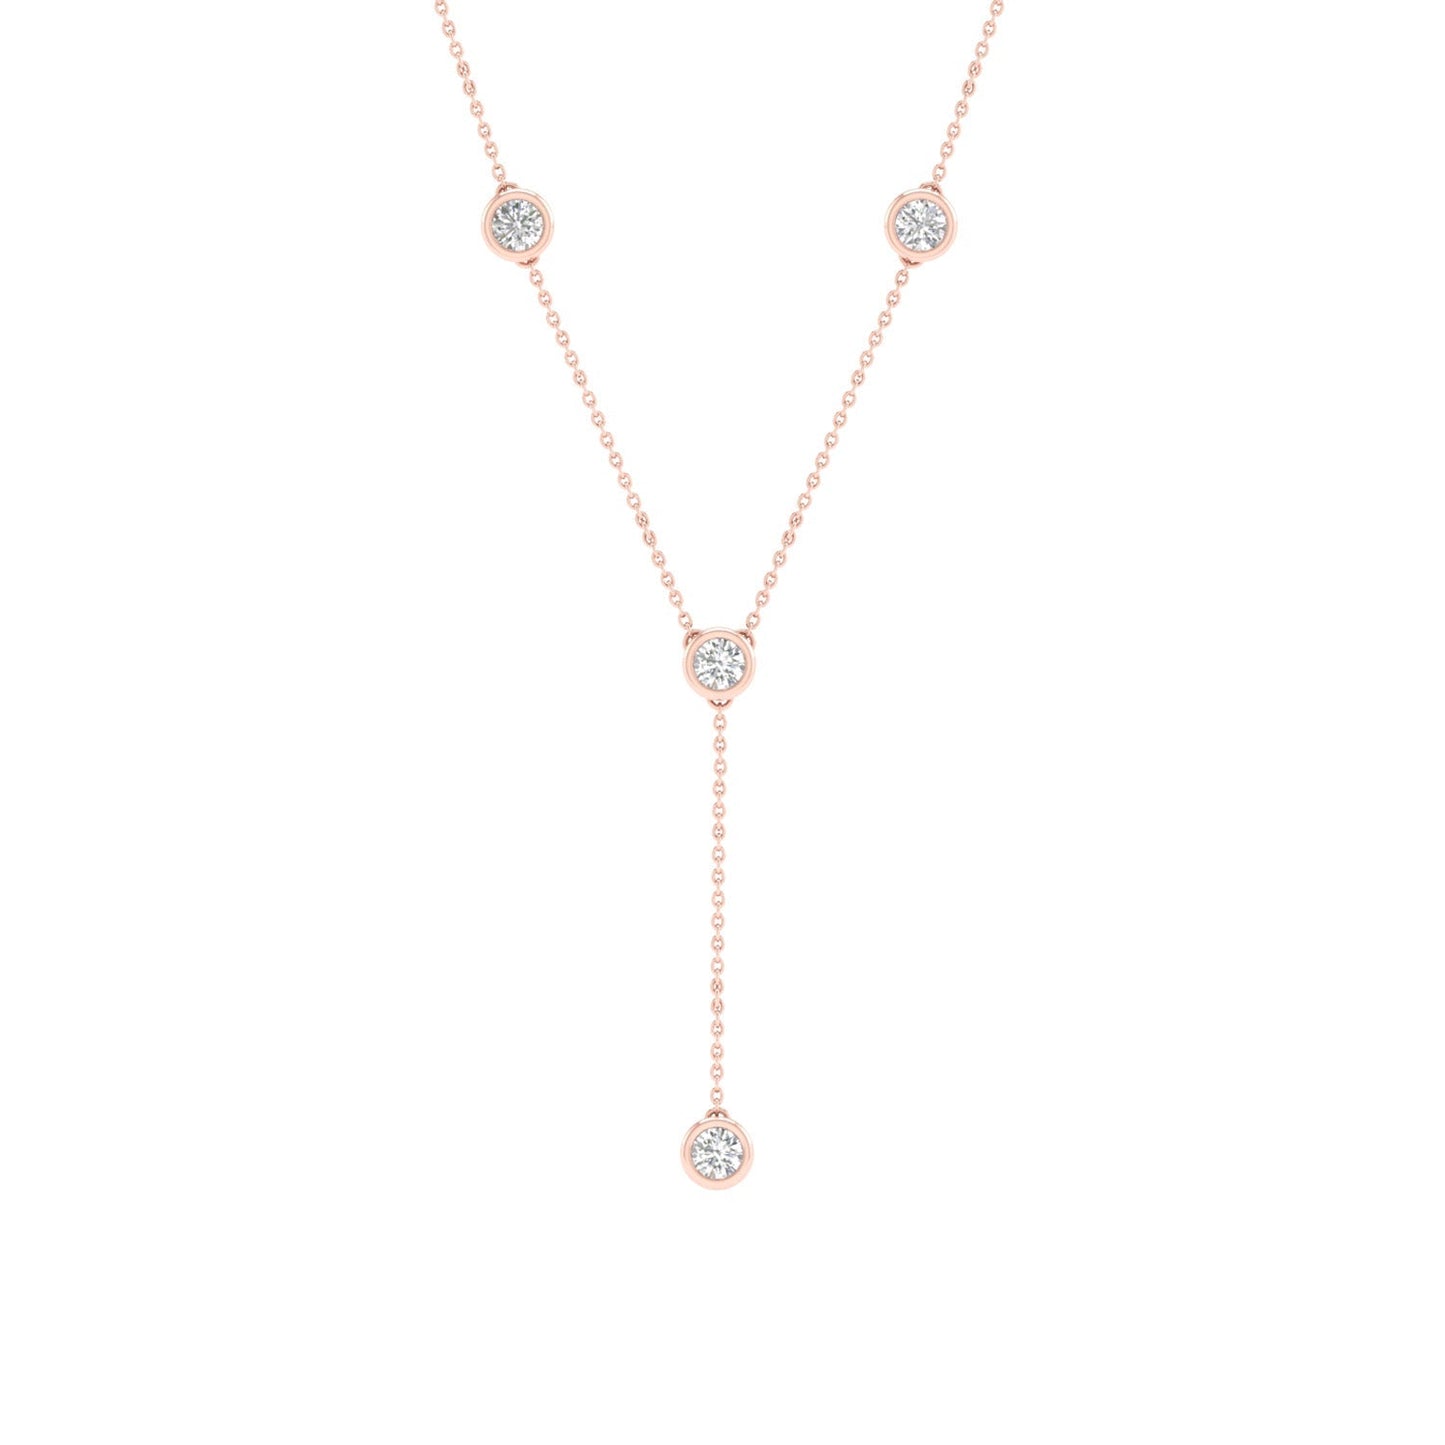 Encompassing Round Stationed Y Necklace_Product angle_1/4 Ct. - 1